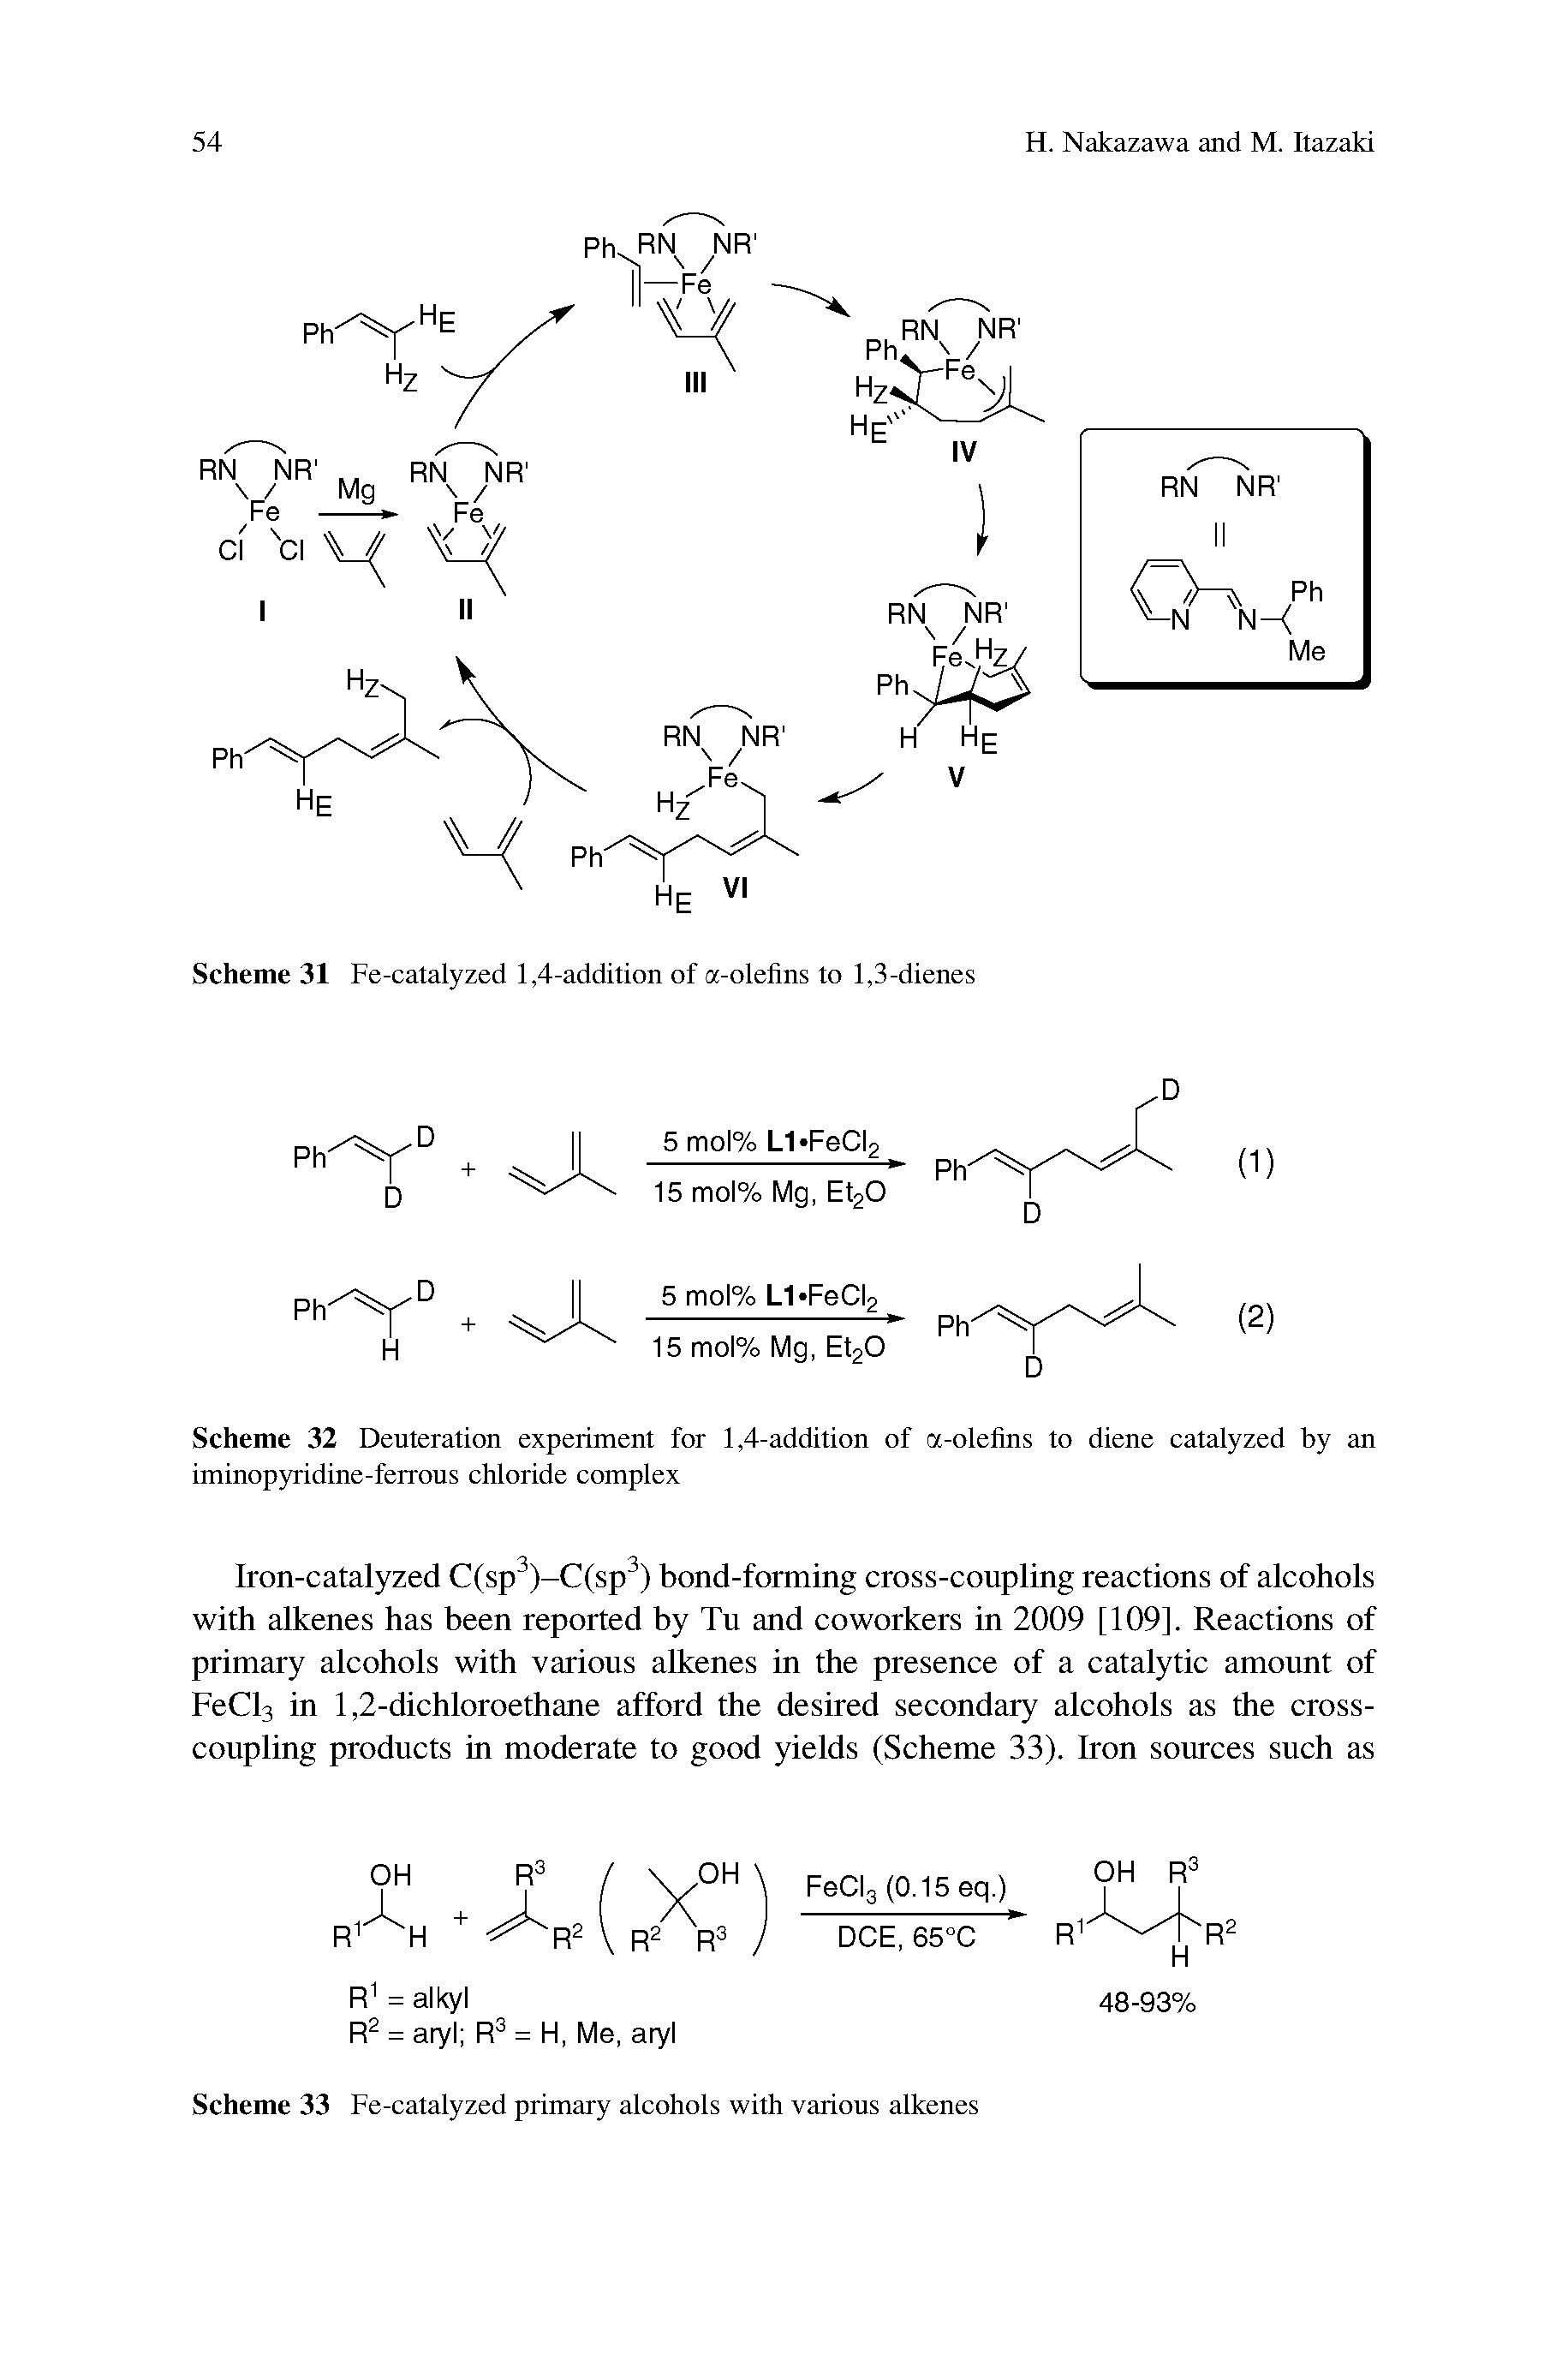 Scheme 32 Deuteration experiment for 1,4-addition of a-olefins to diene catalyzed by an iminopyridine-ferrous chloride complex...